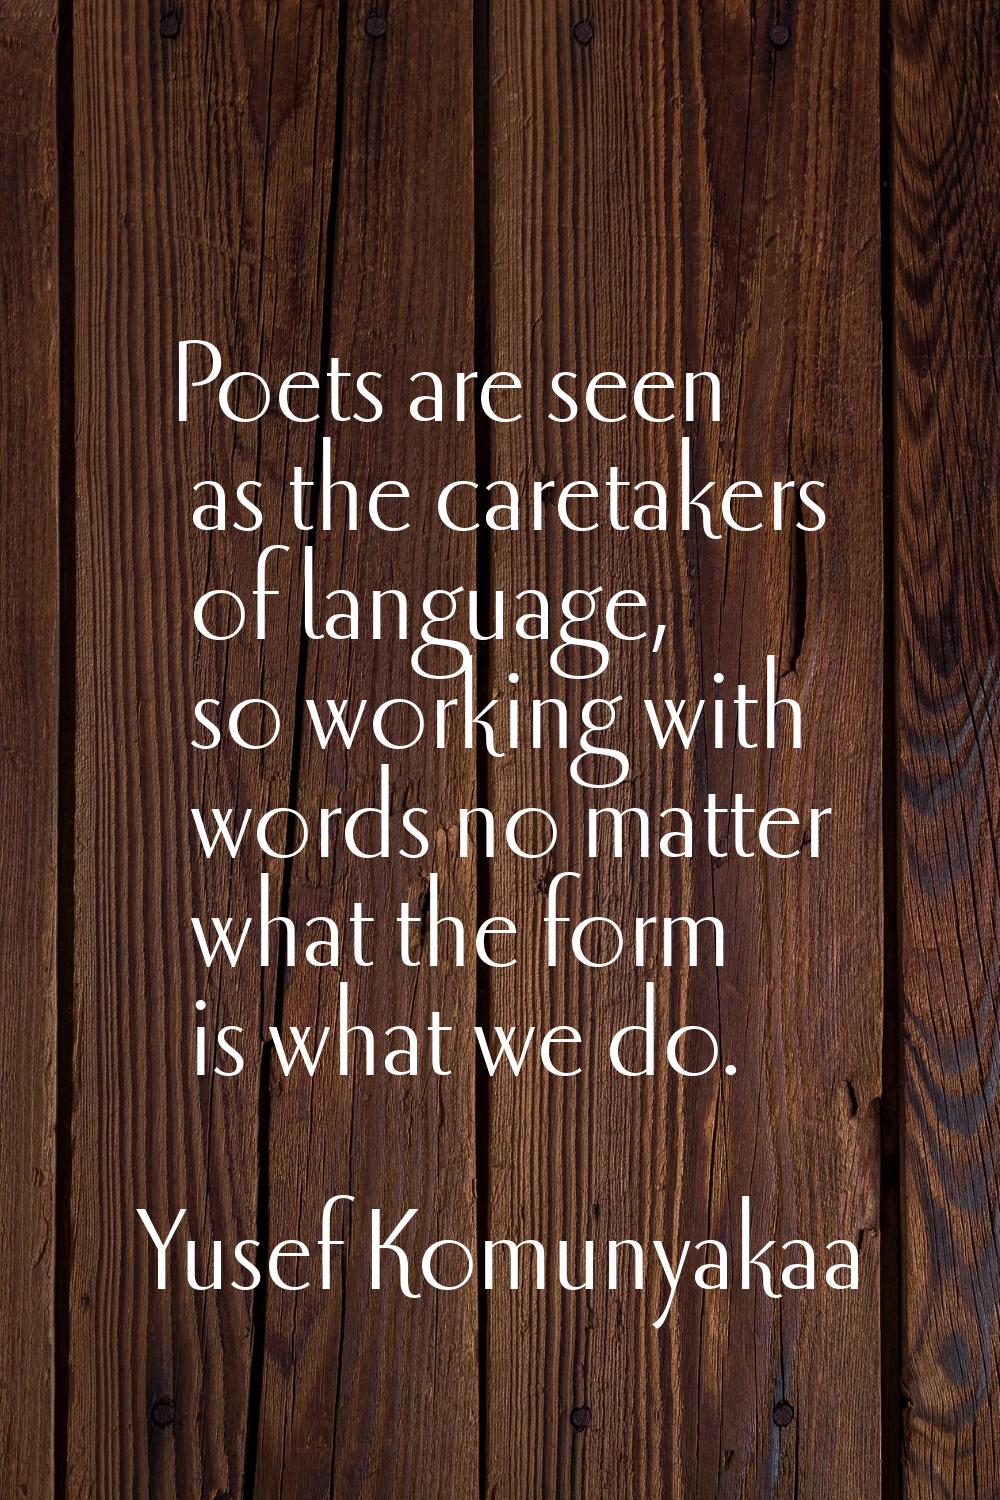 Poets are seen as the caretakers of language, so working with words no matter what the form is what